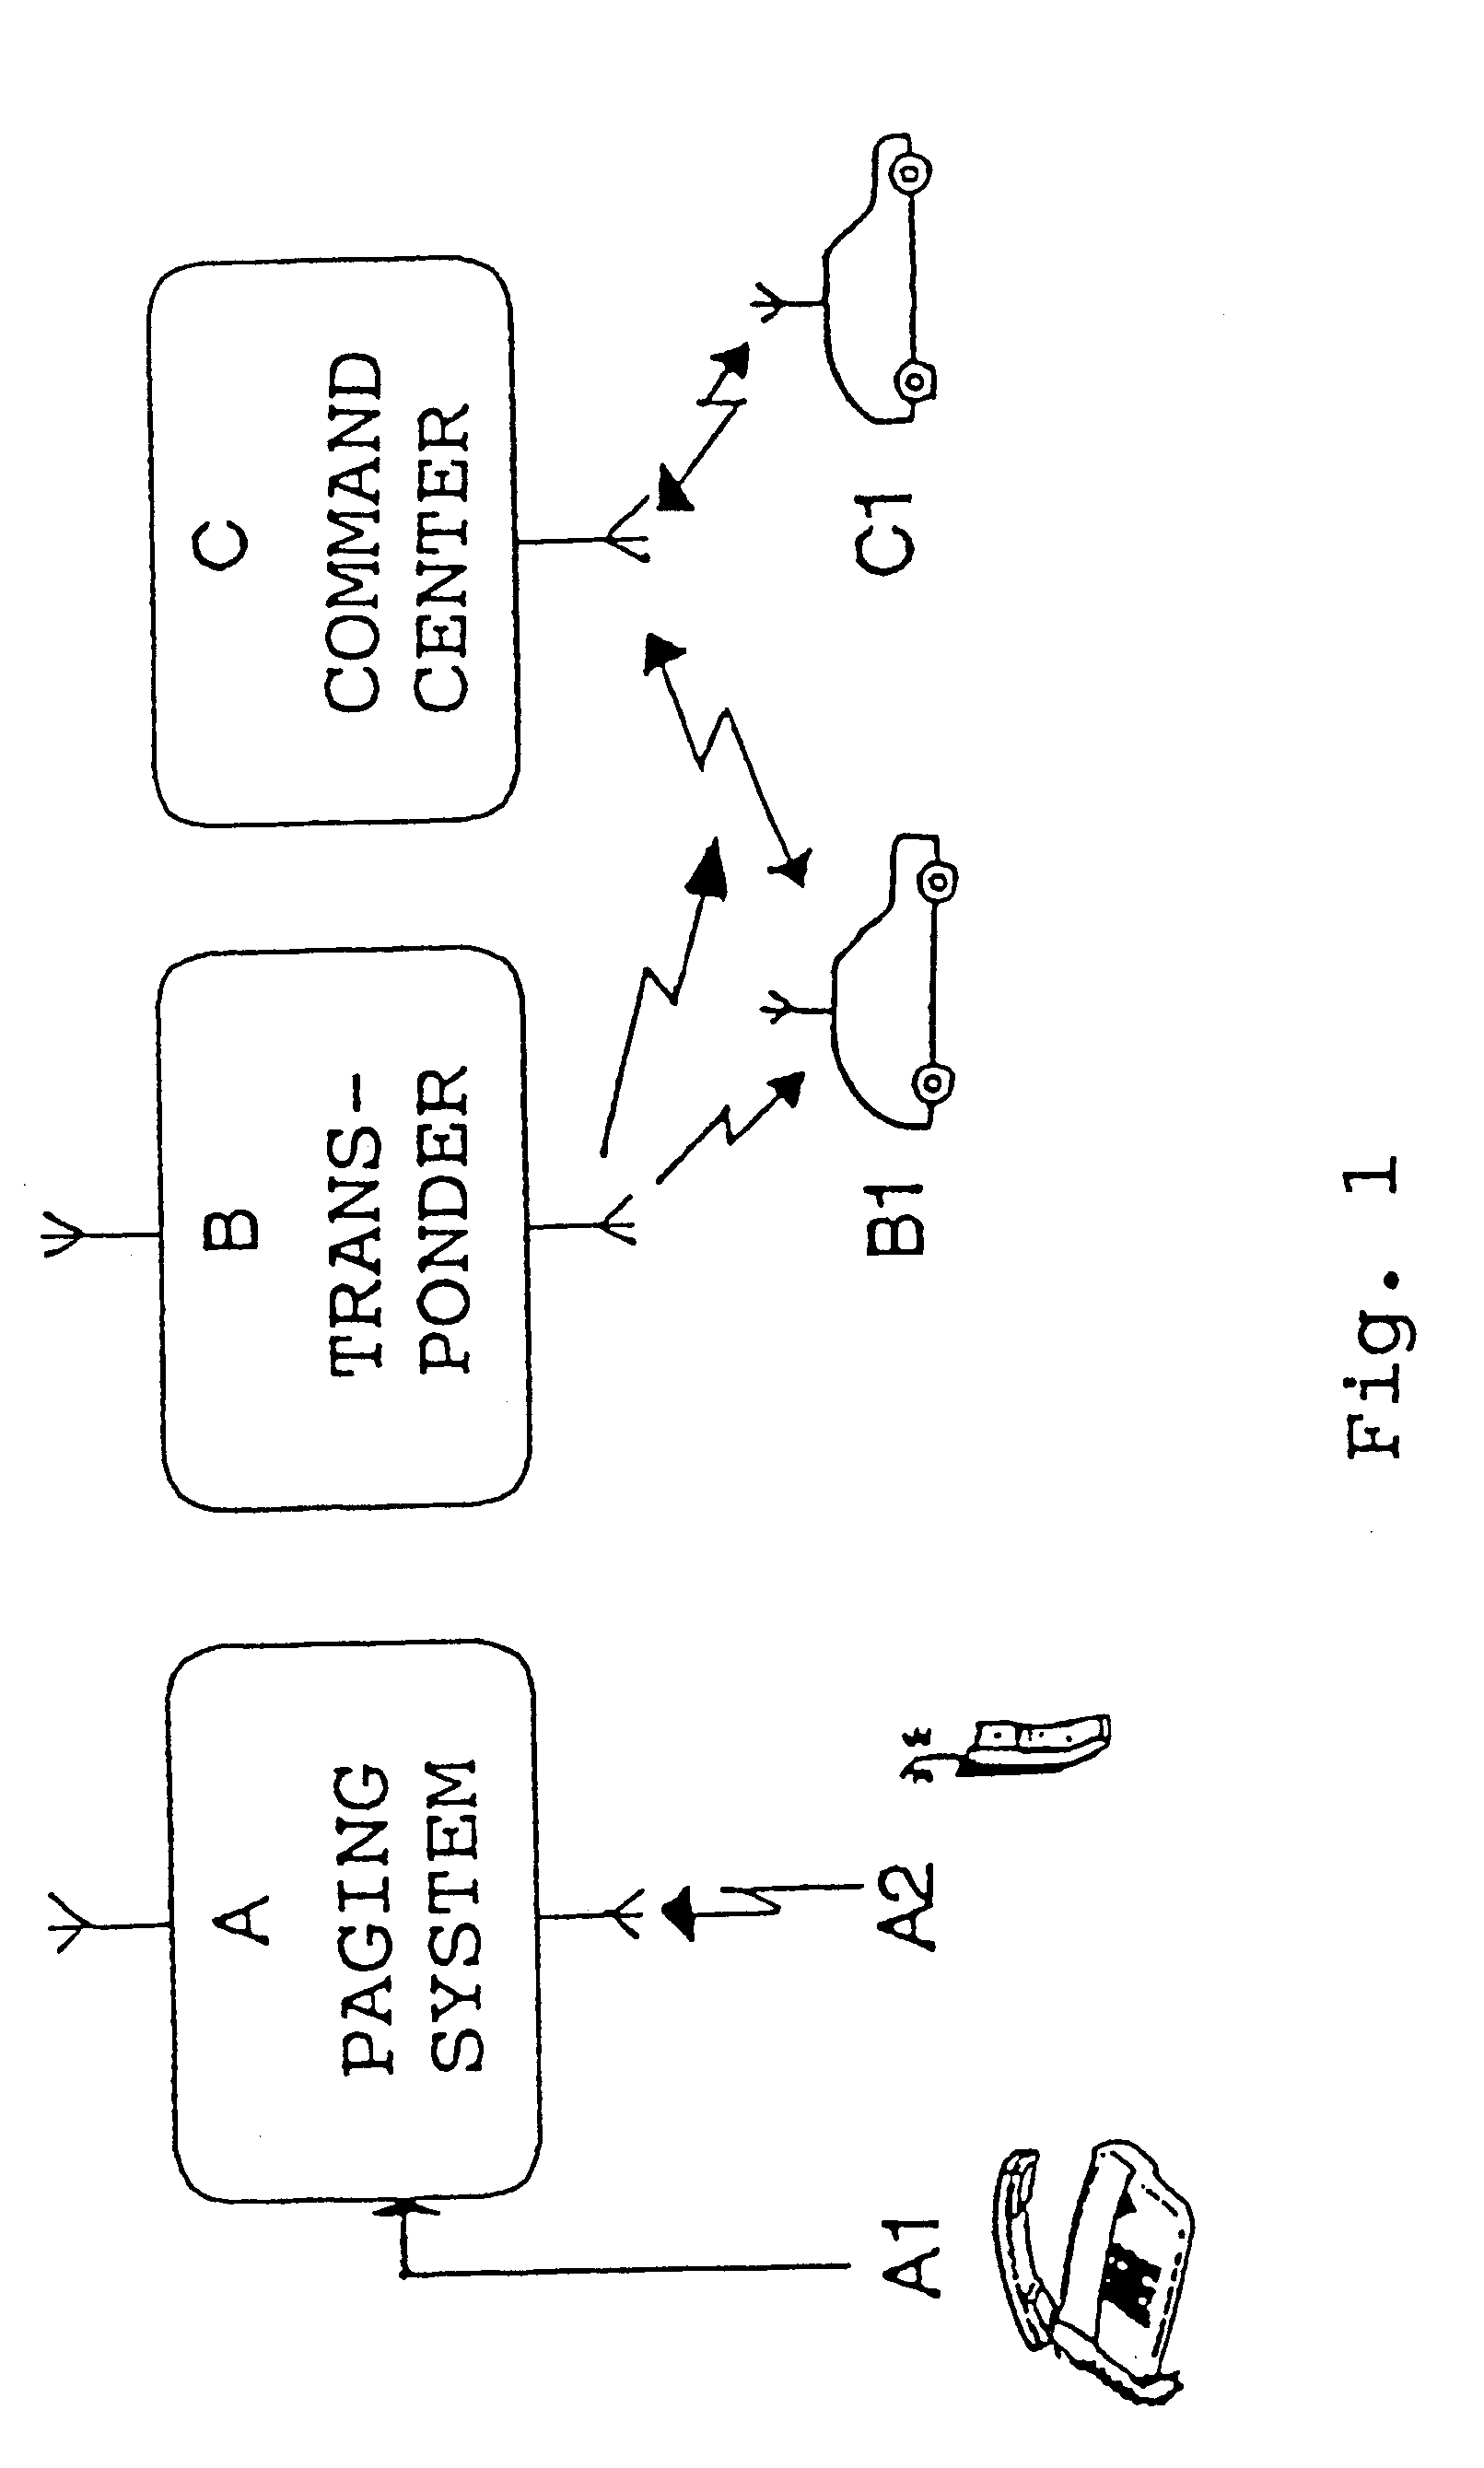 Transponder system for localization of an object